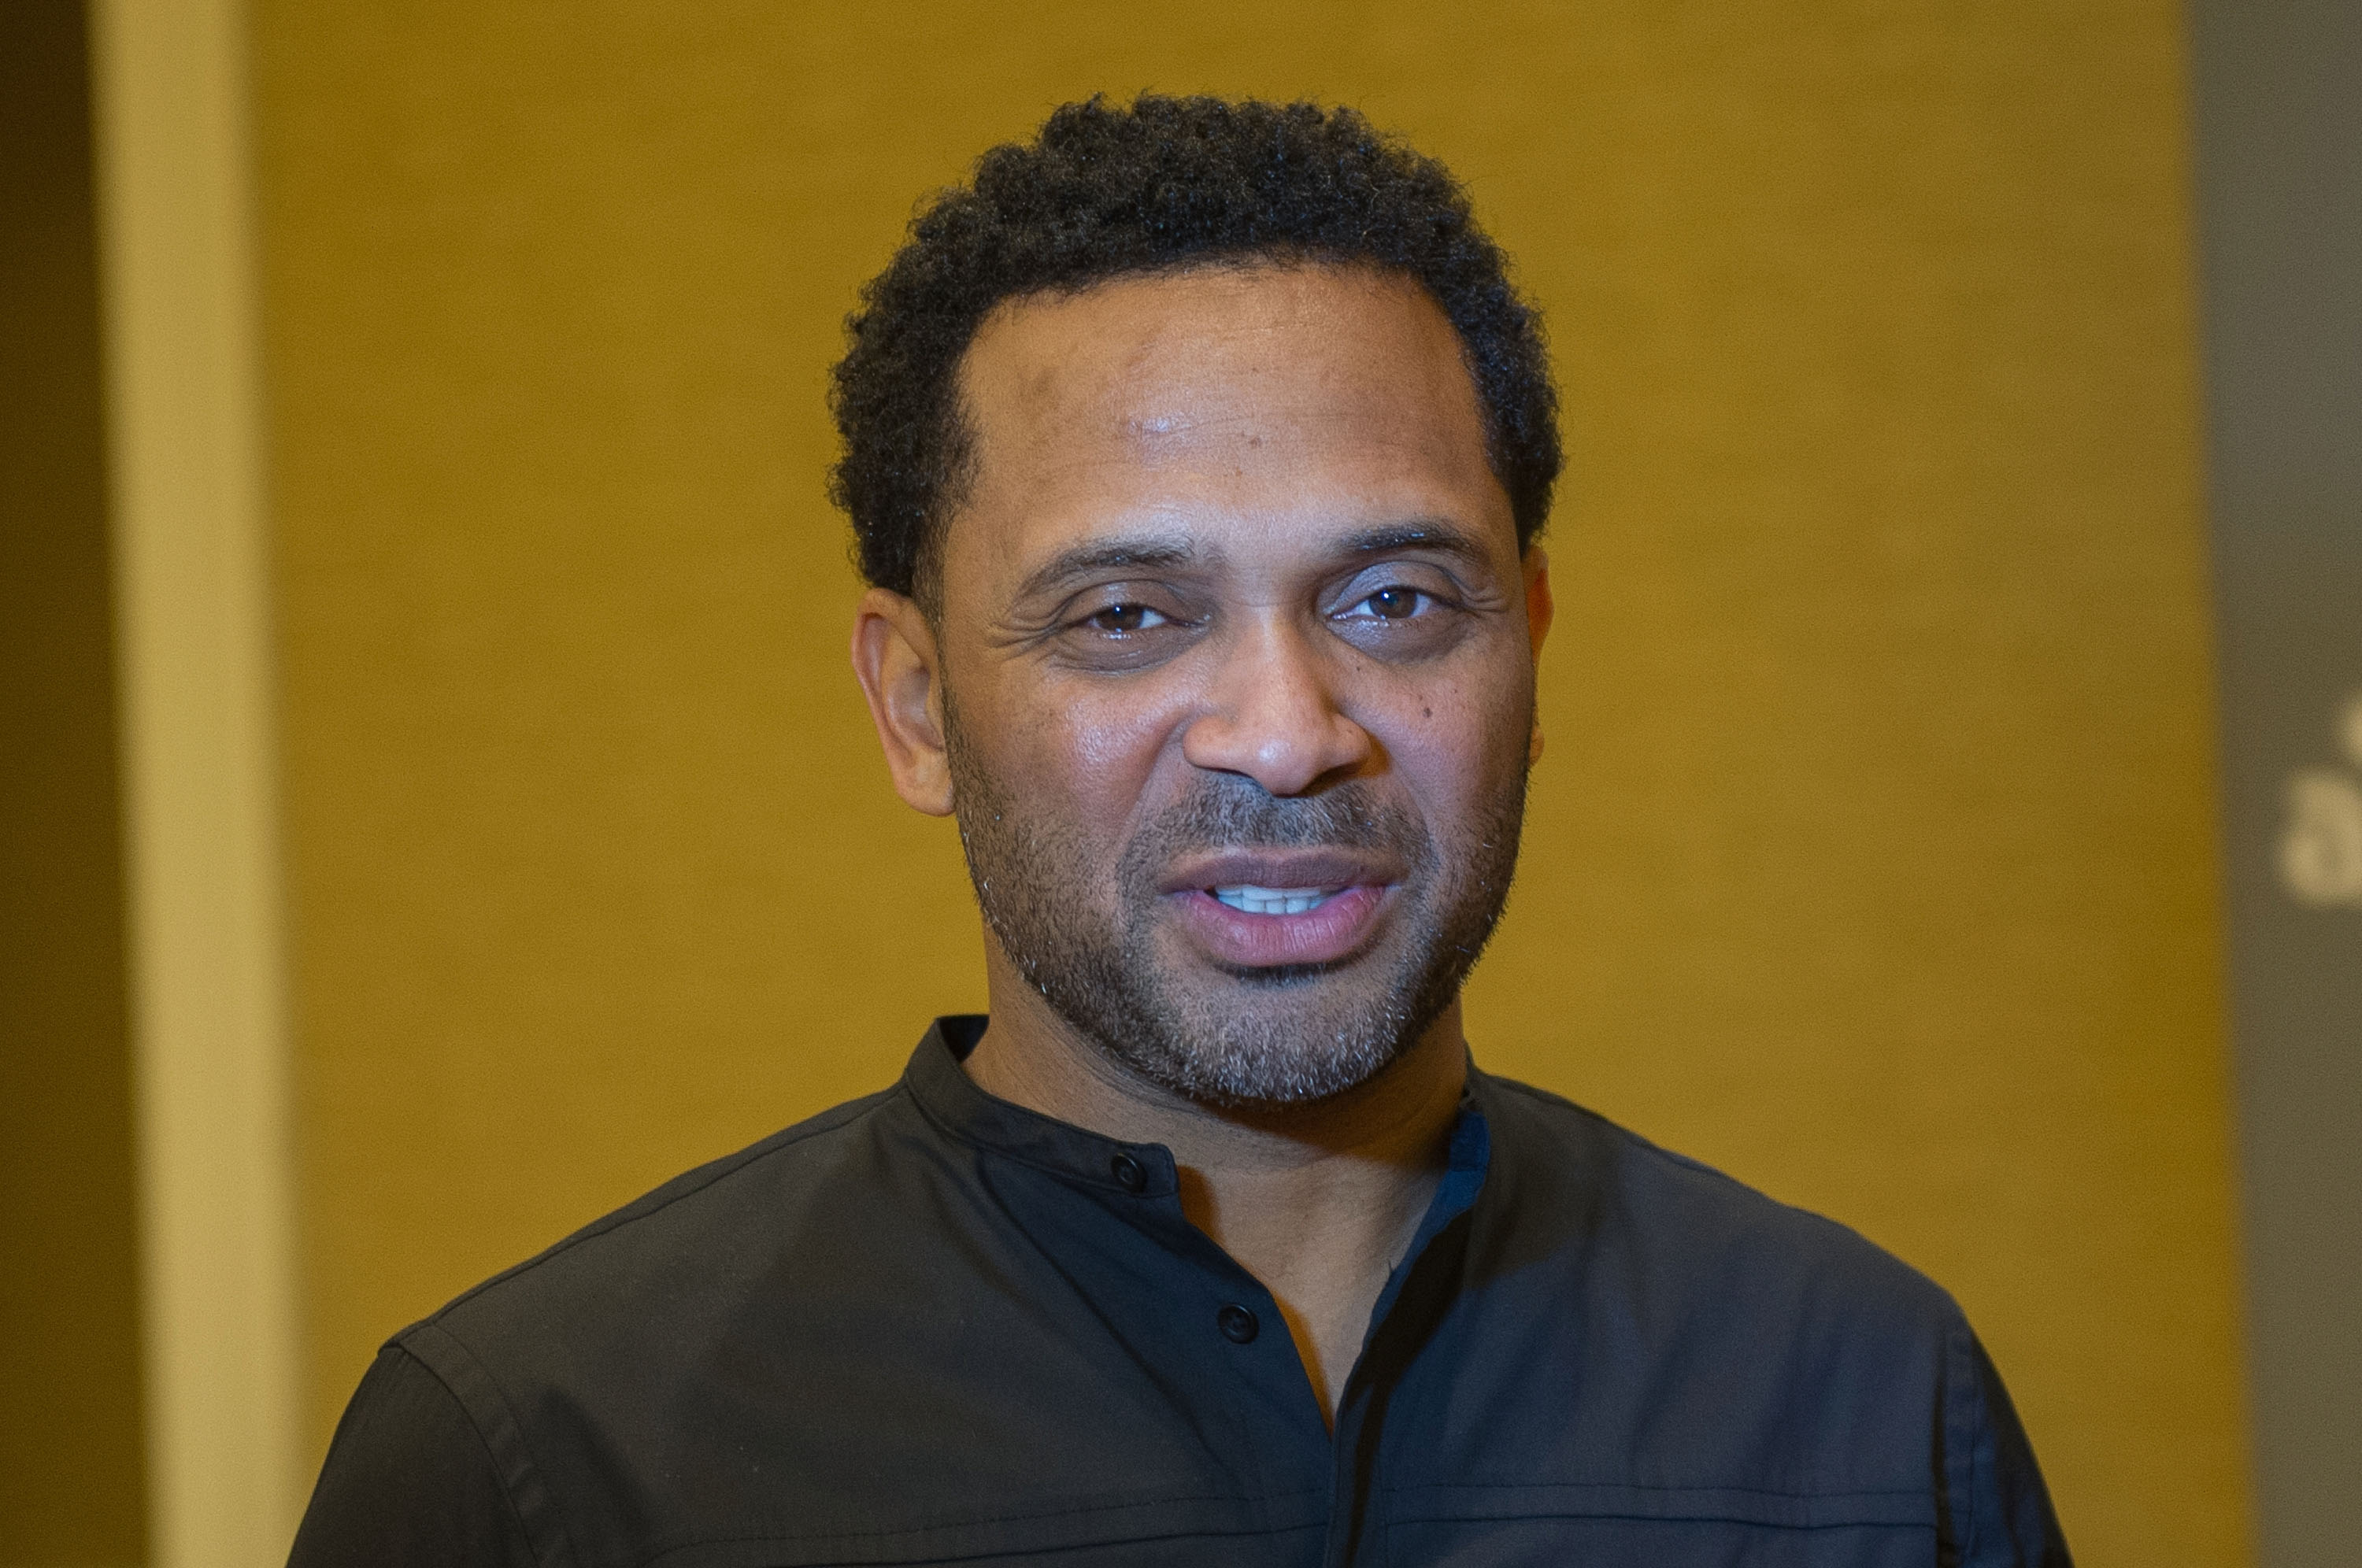 Mike Epps poses for a photo at an event in Atlanta, Georgia